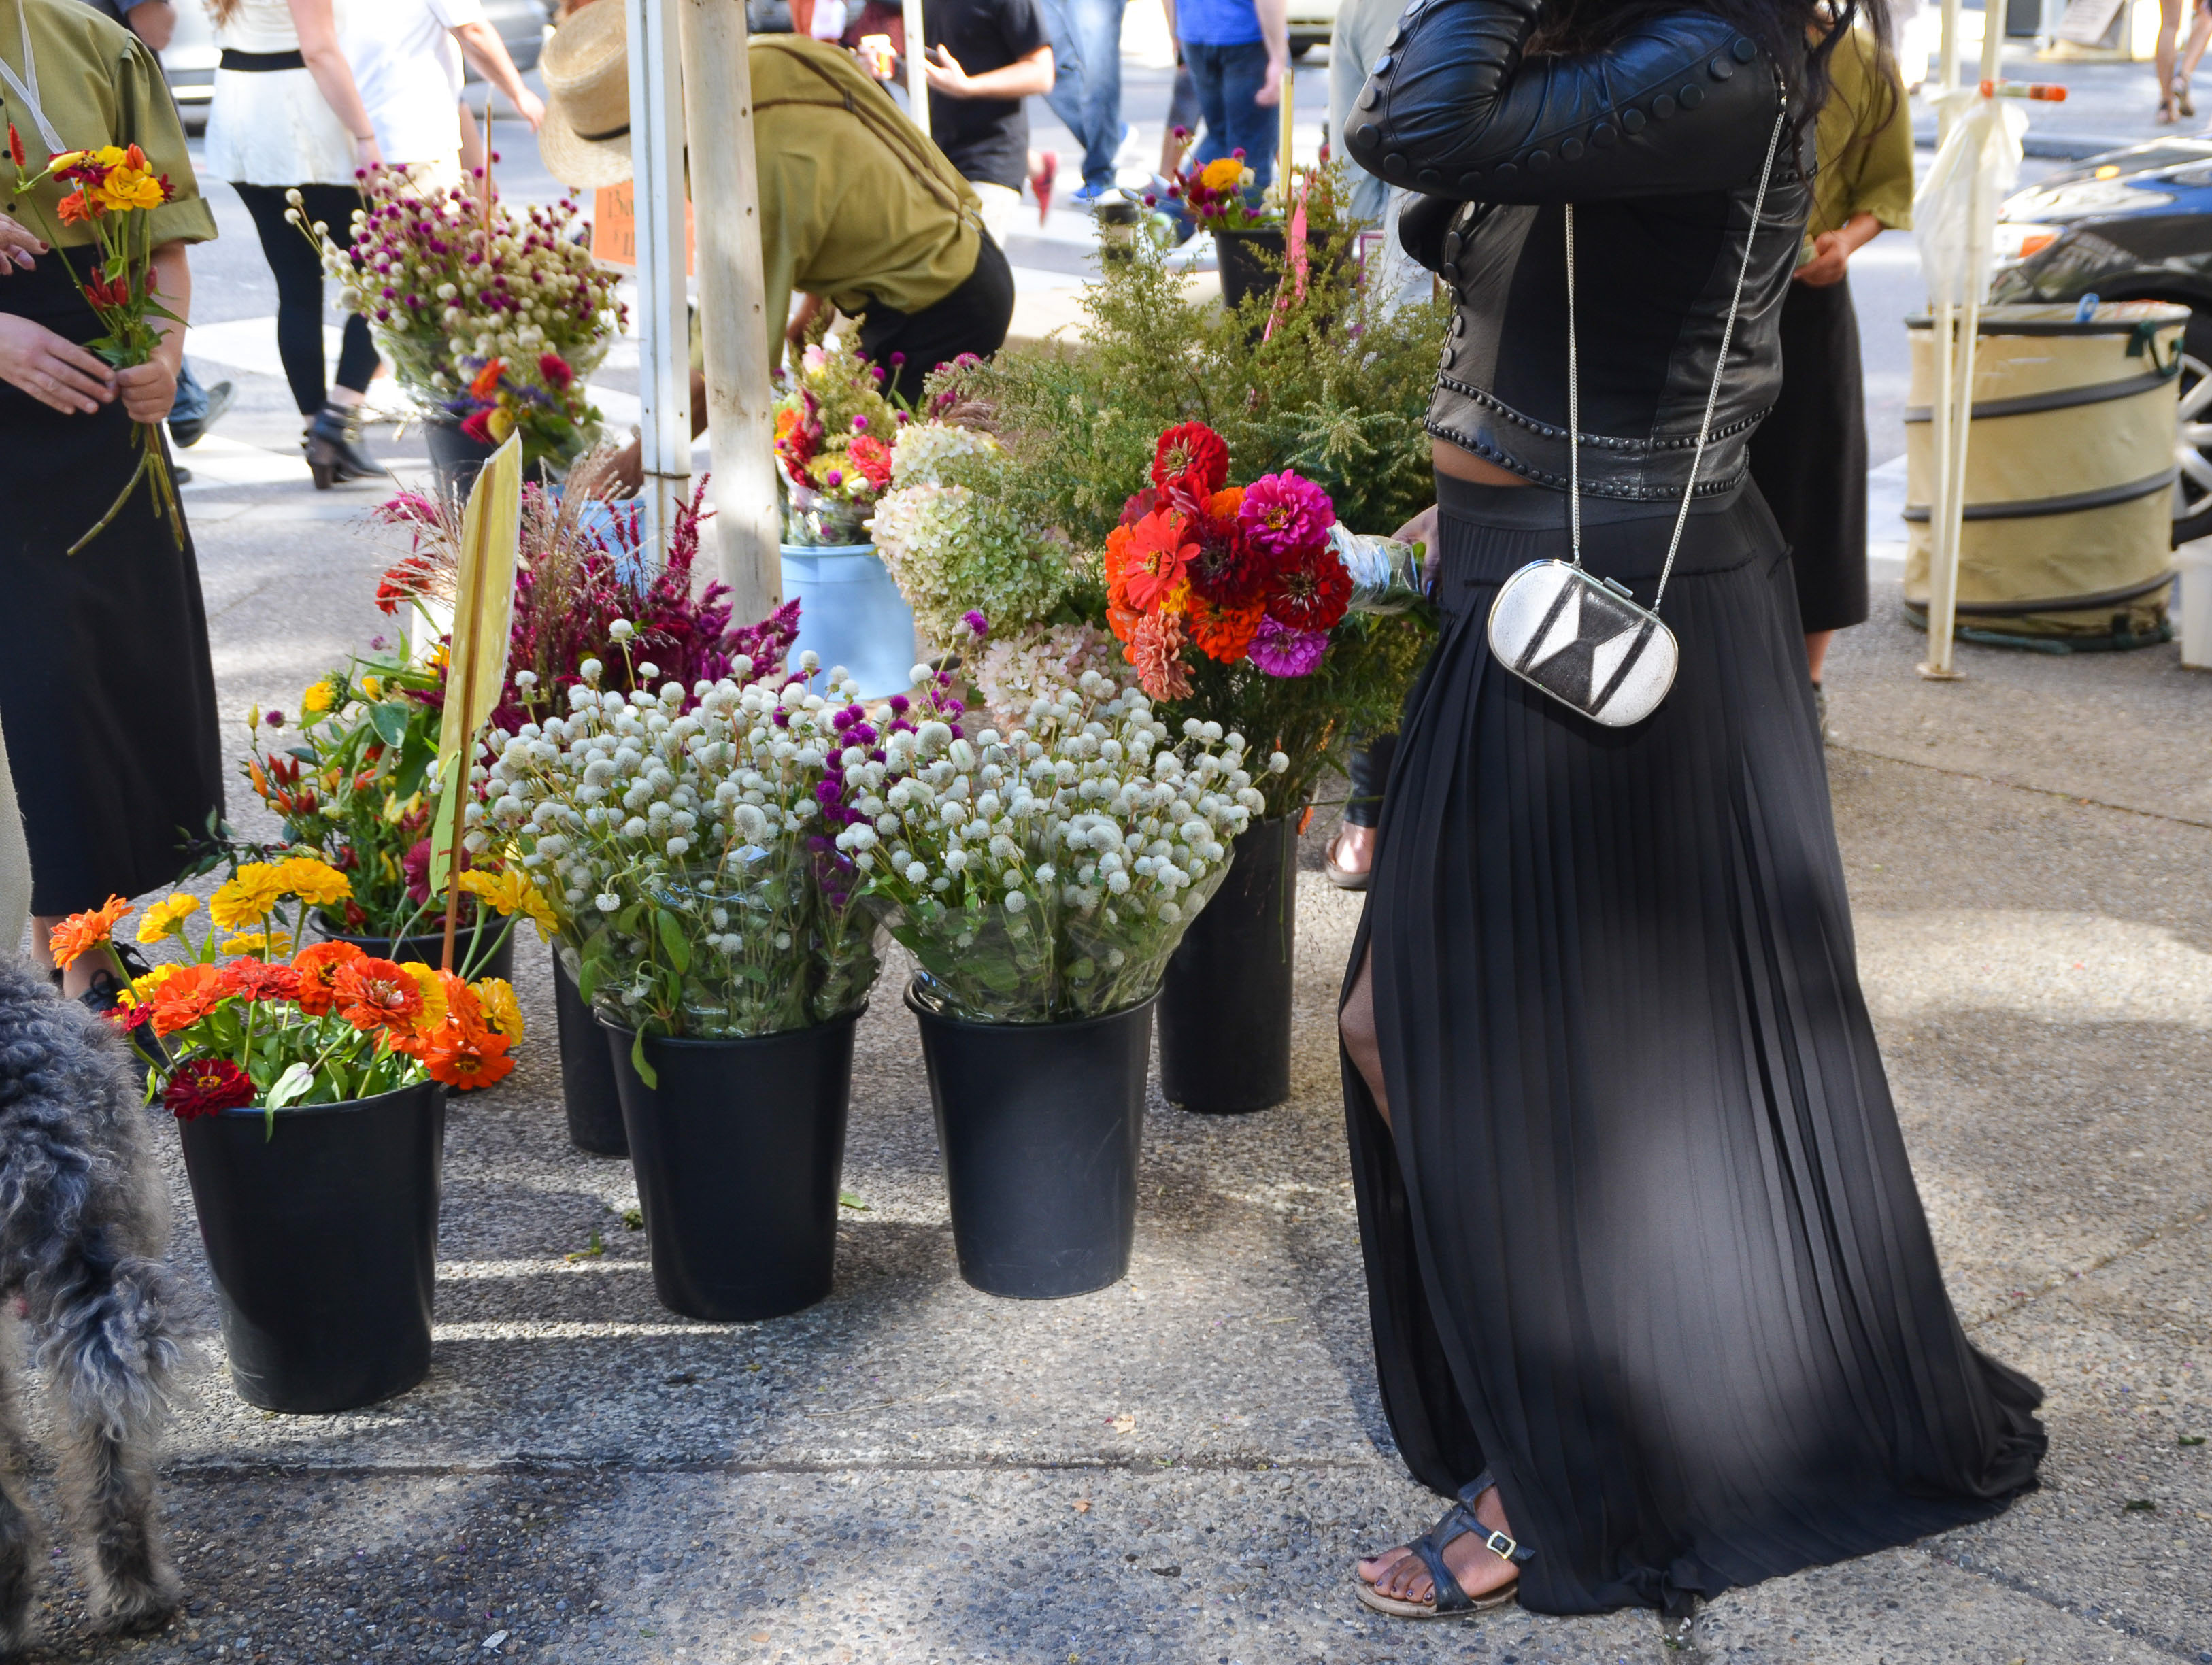 Amish Farmer's Market - Rittenhouse Square | StyleChile | Life, Styled